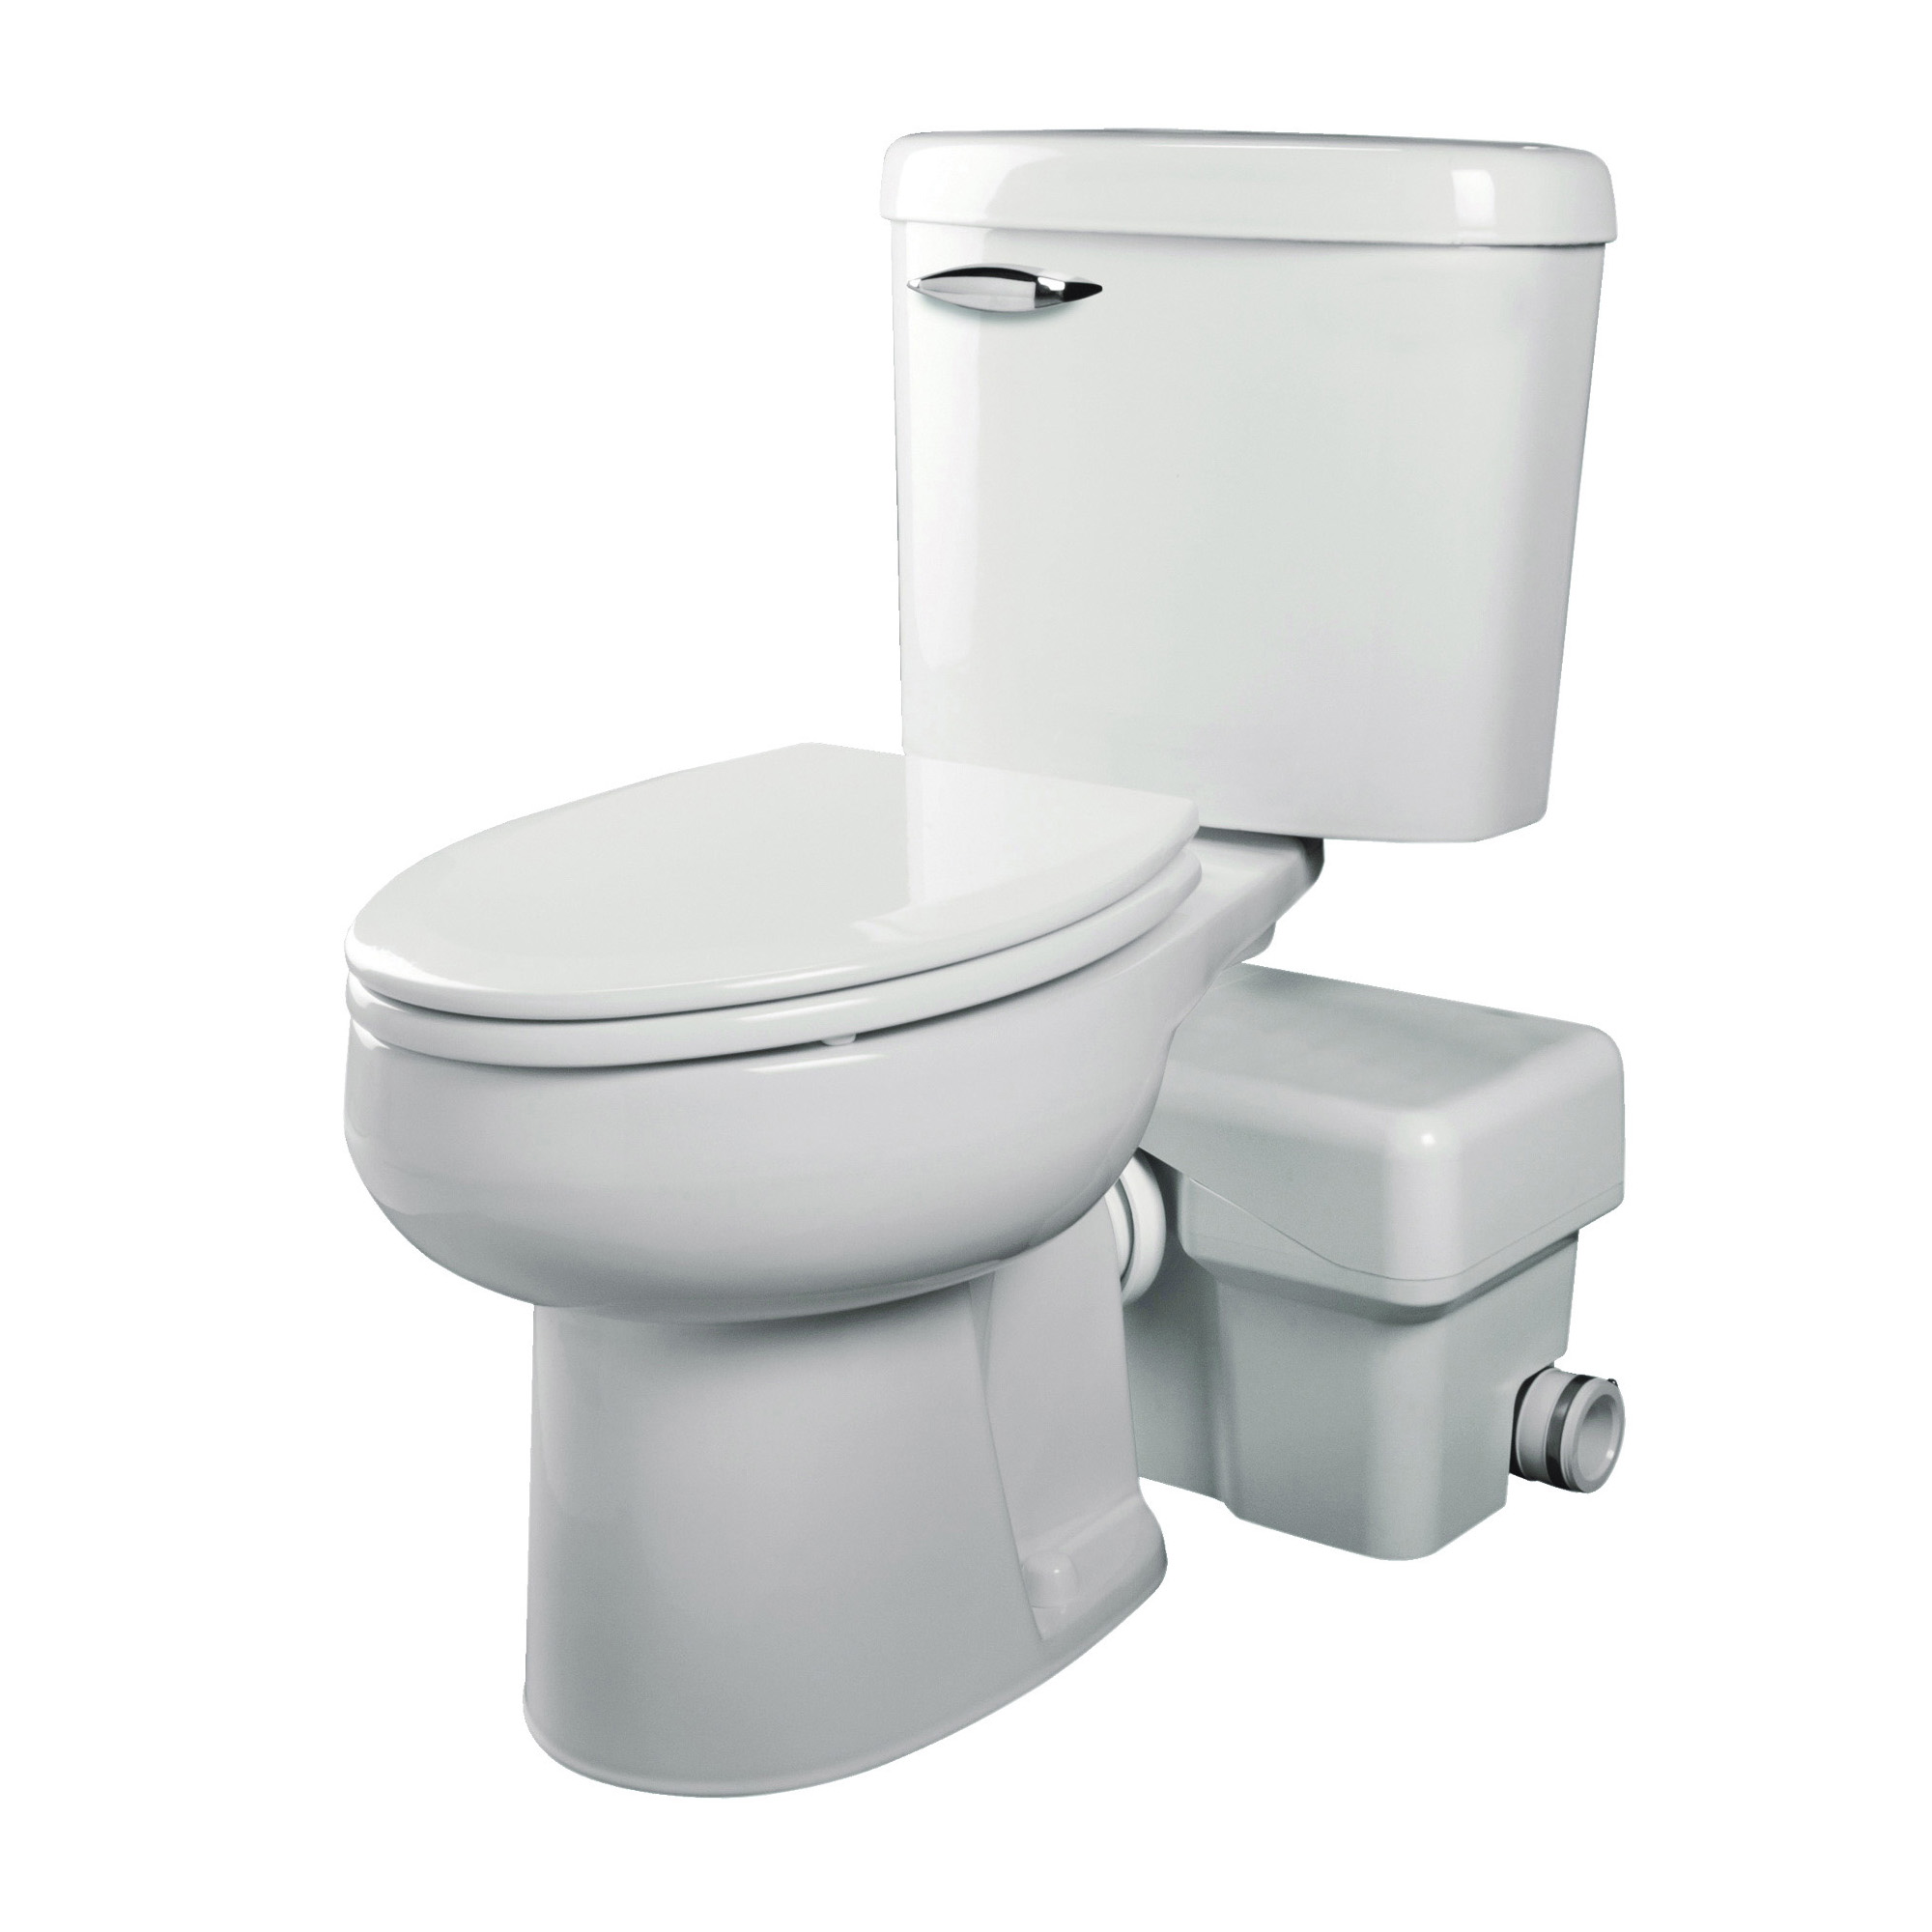 Liberty Pumps® ASCENTII-ESW Macerating Toilet, Elongated Bowl, 17-3/8 in H Rim, 1.28 gal Flush Rate, White, Import